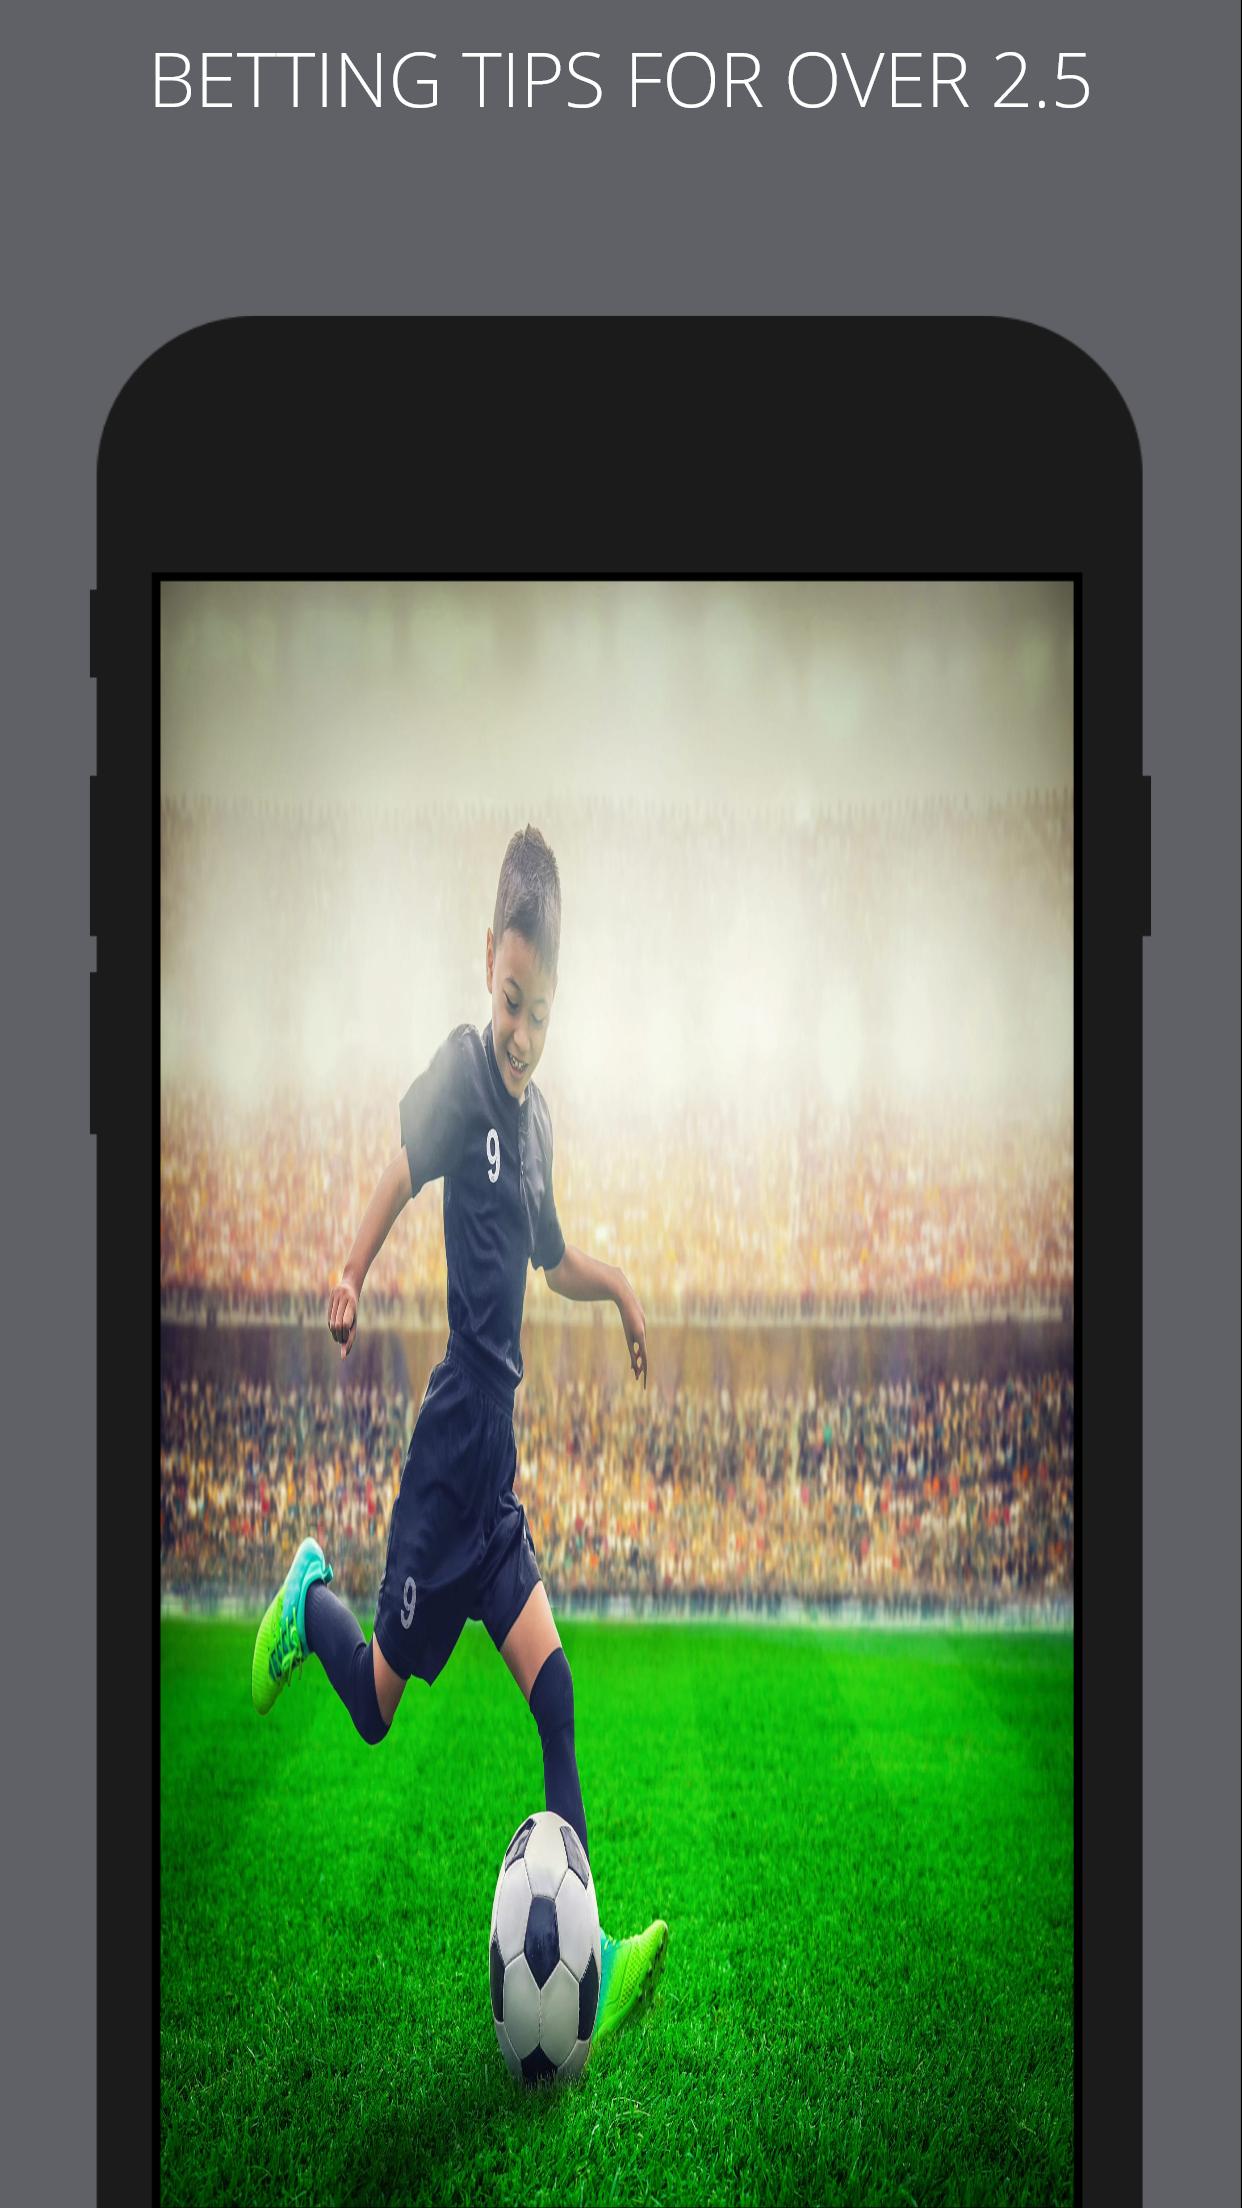 Statarea Football betting tips for Android - APK Download